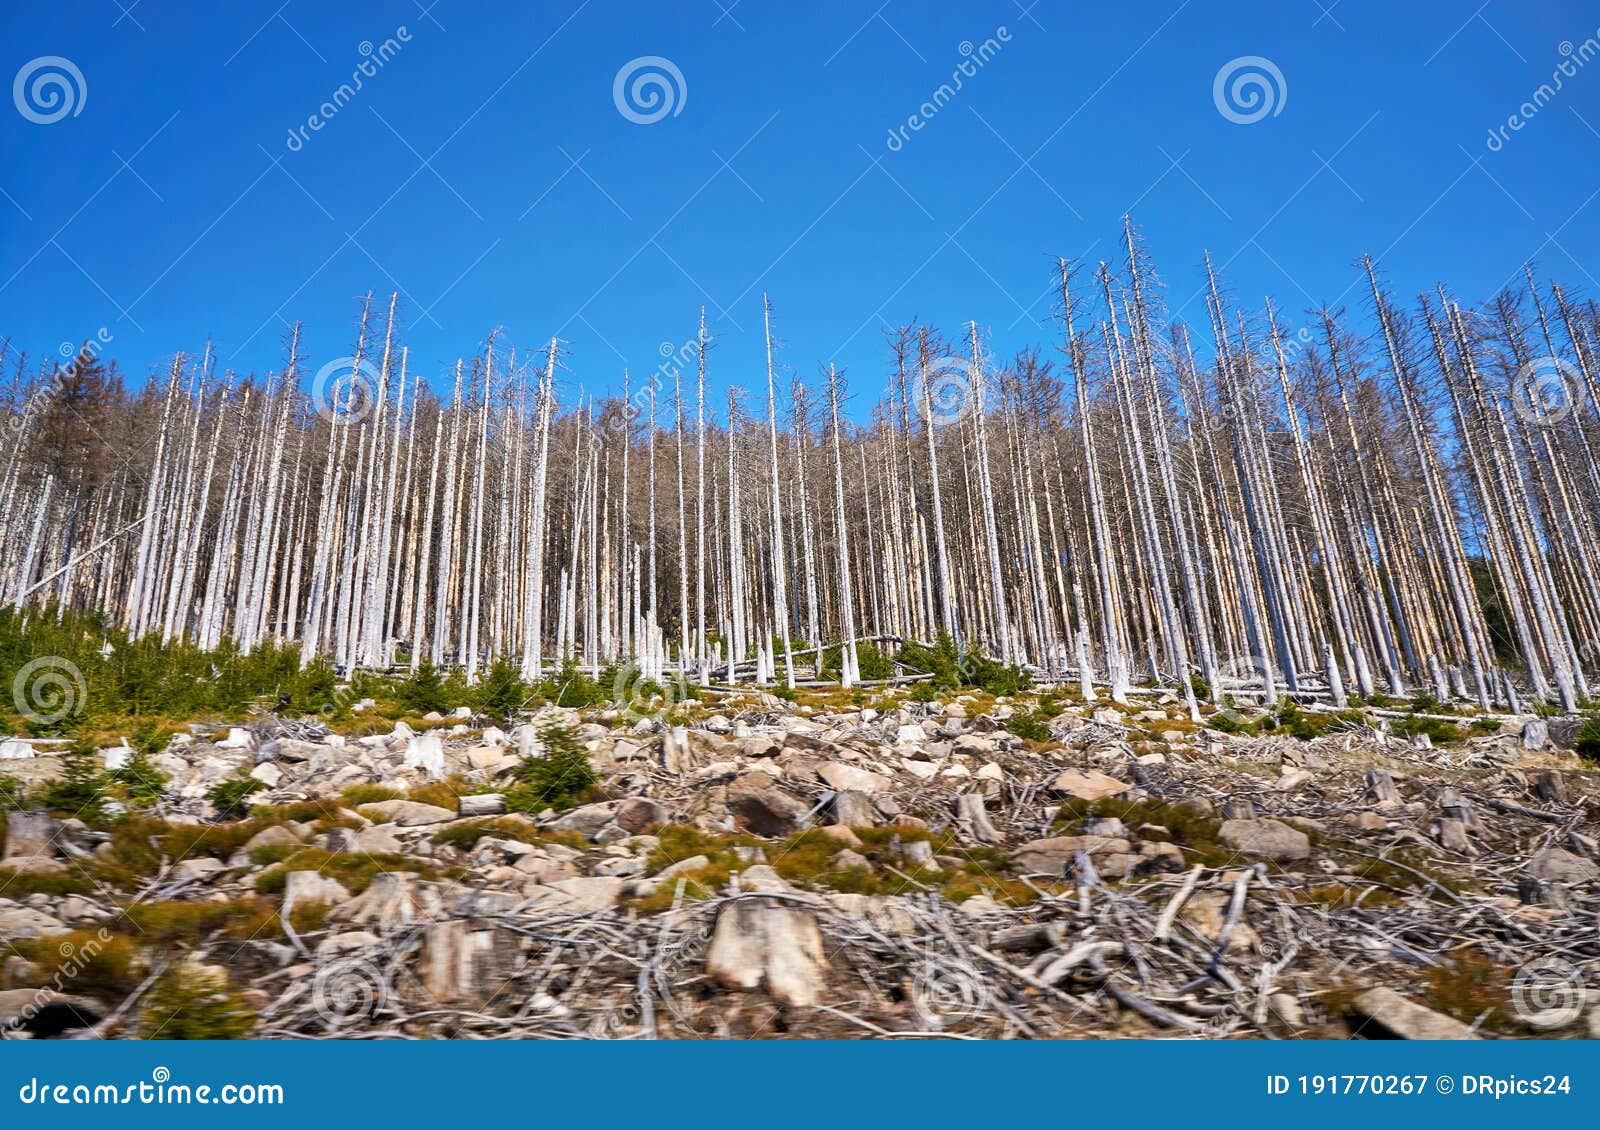 disastrous dying trees in the woods. through climate change, drought and bark beetles. dynamics through motion blur